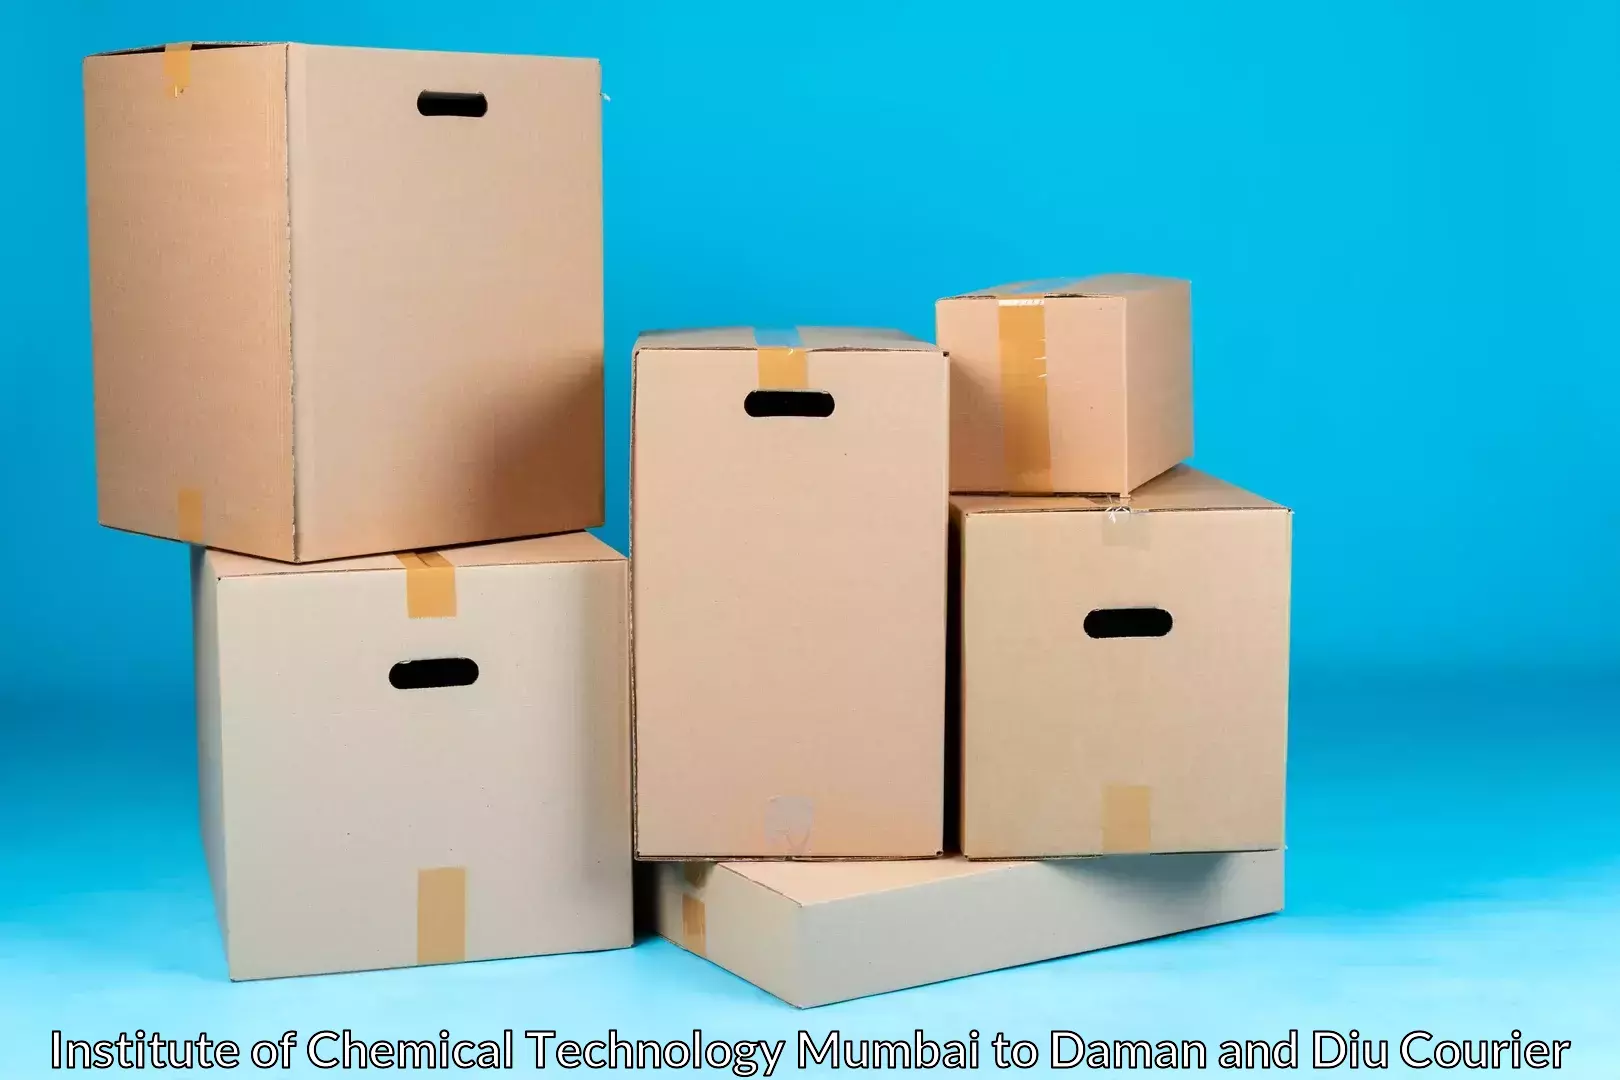 Professional moving company Institute of Chemical Technology Mumbai to Daman